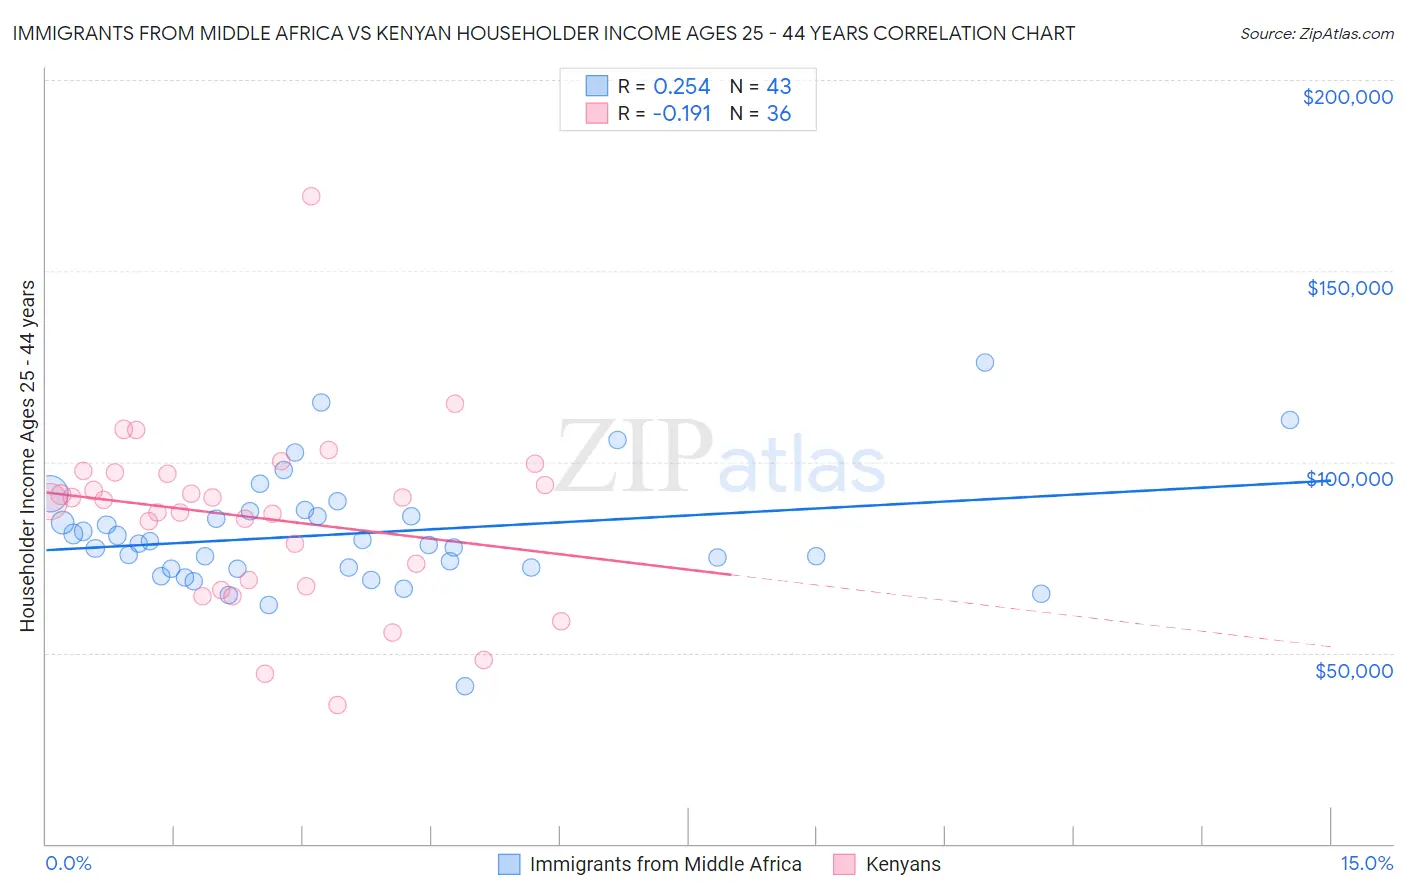 Immigrants from Middle Africa vs Kenyan Householder Income Ages 25 - 44 years